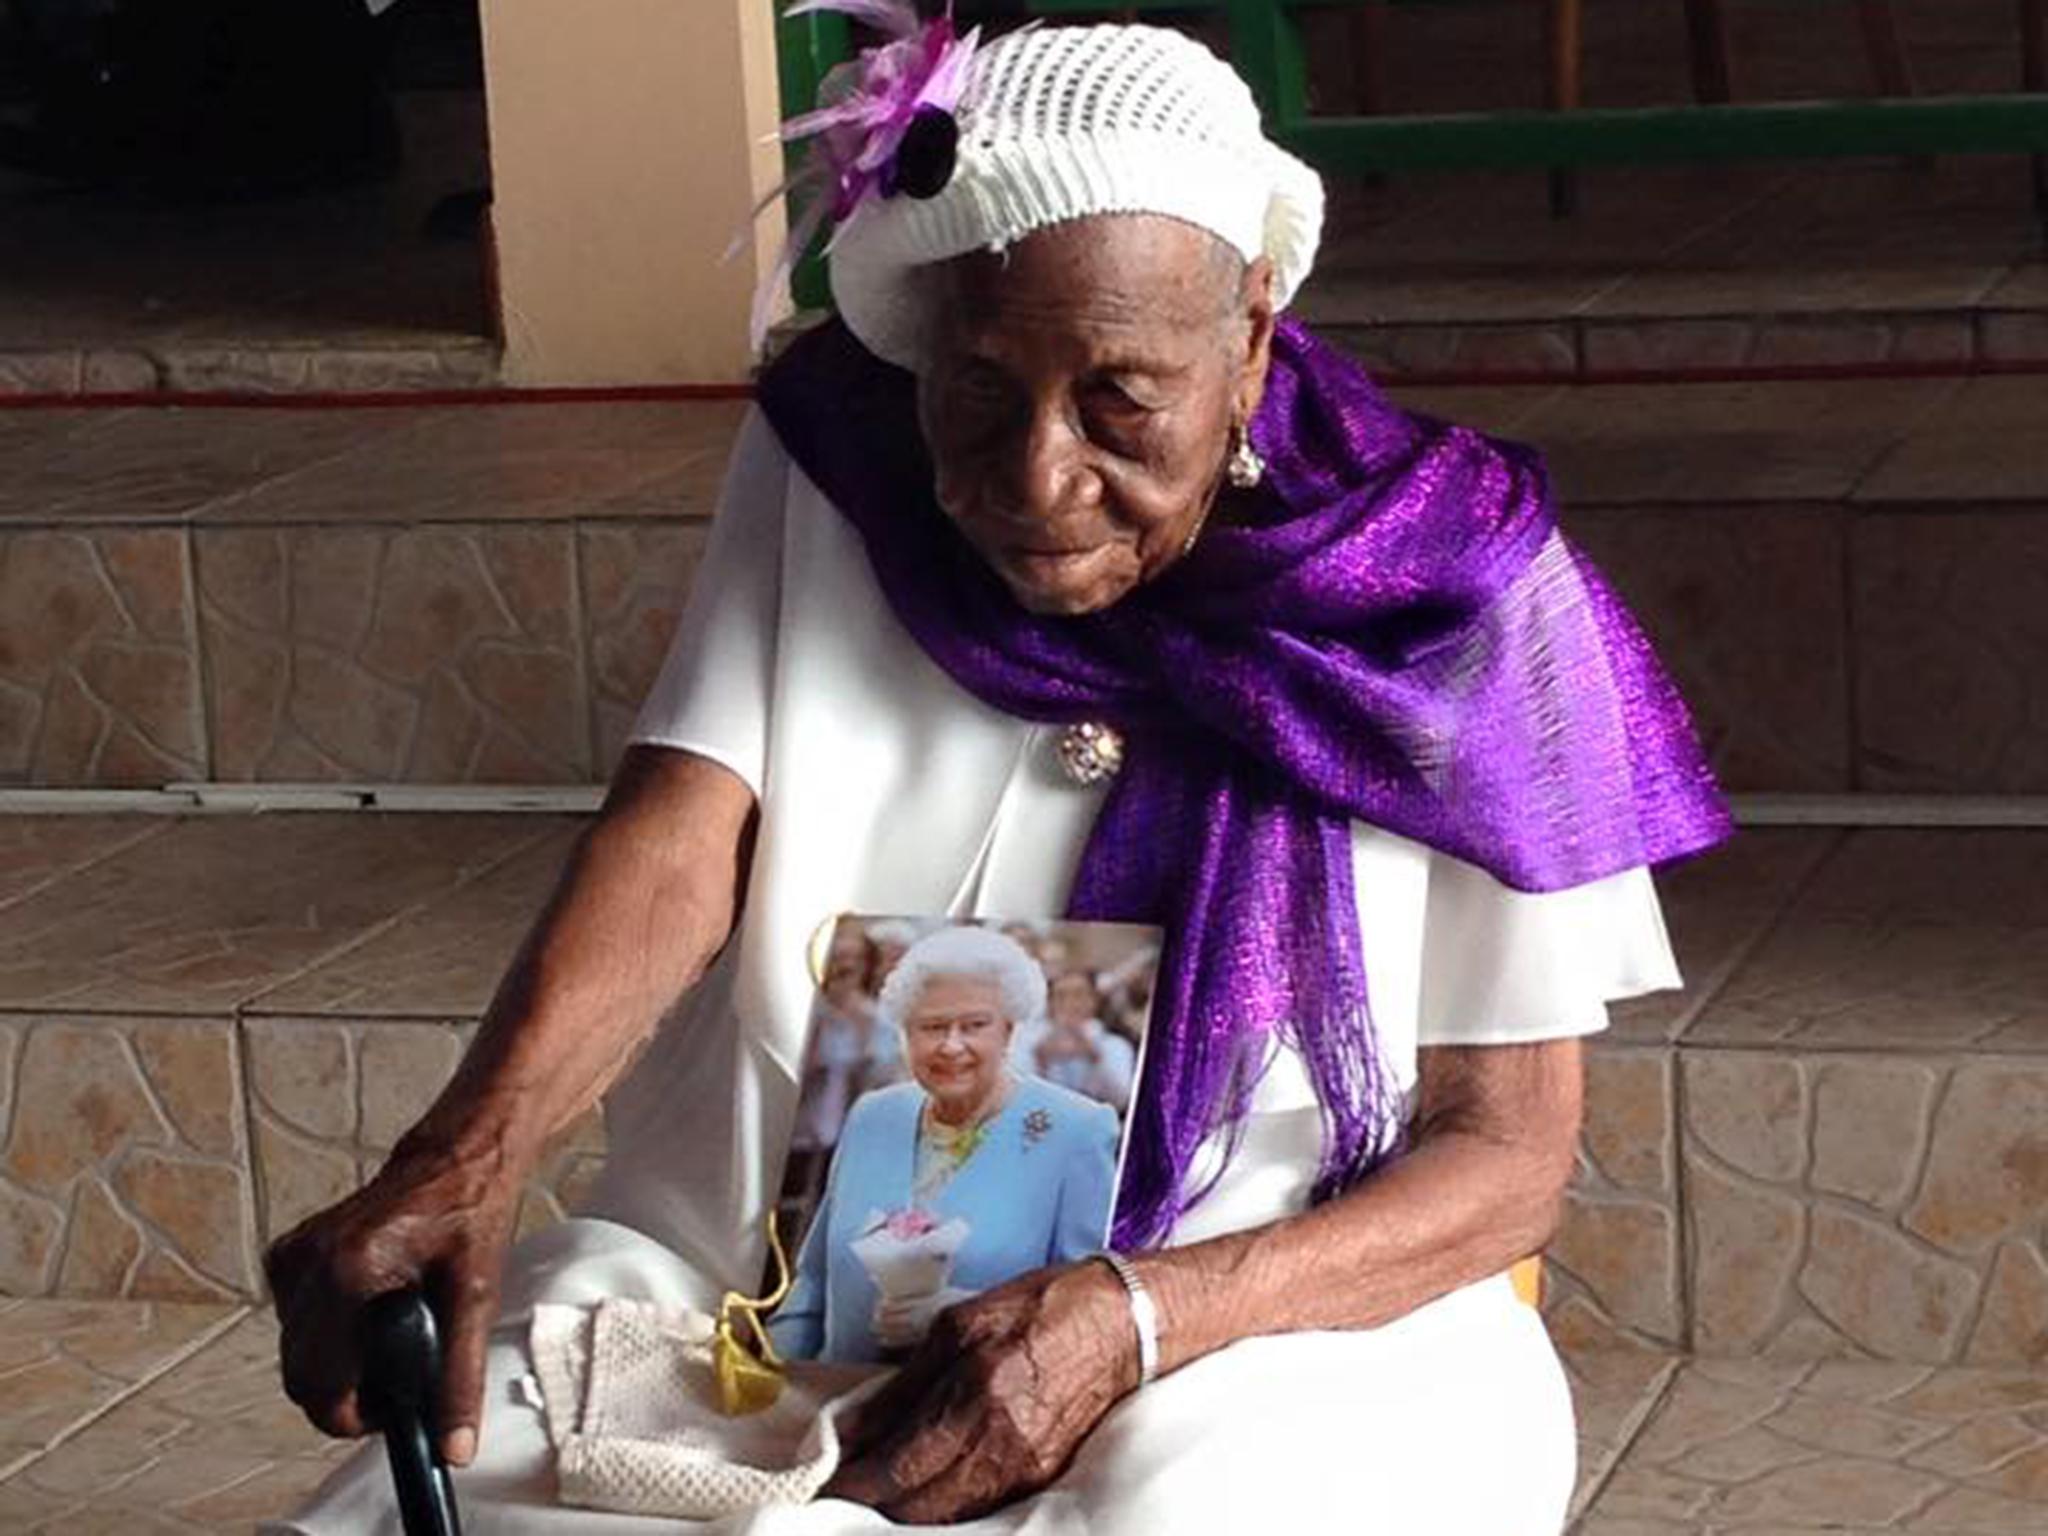 Jamaican Woman Becomes Oldest Person In The World The